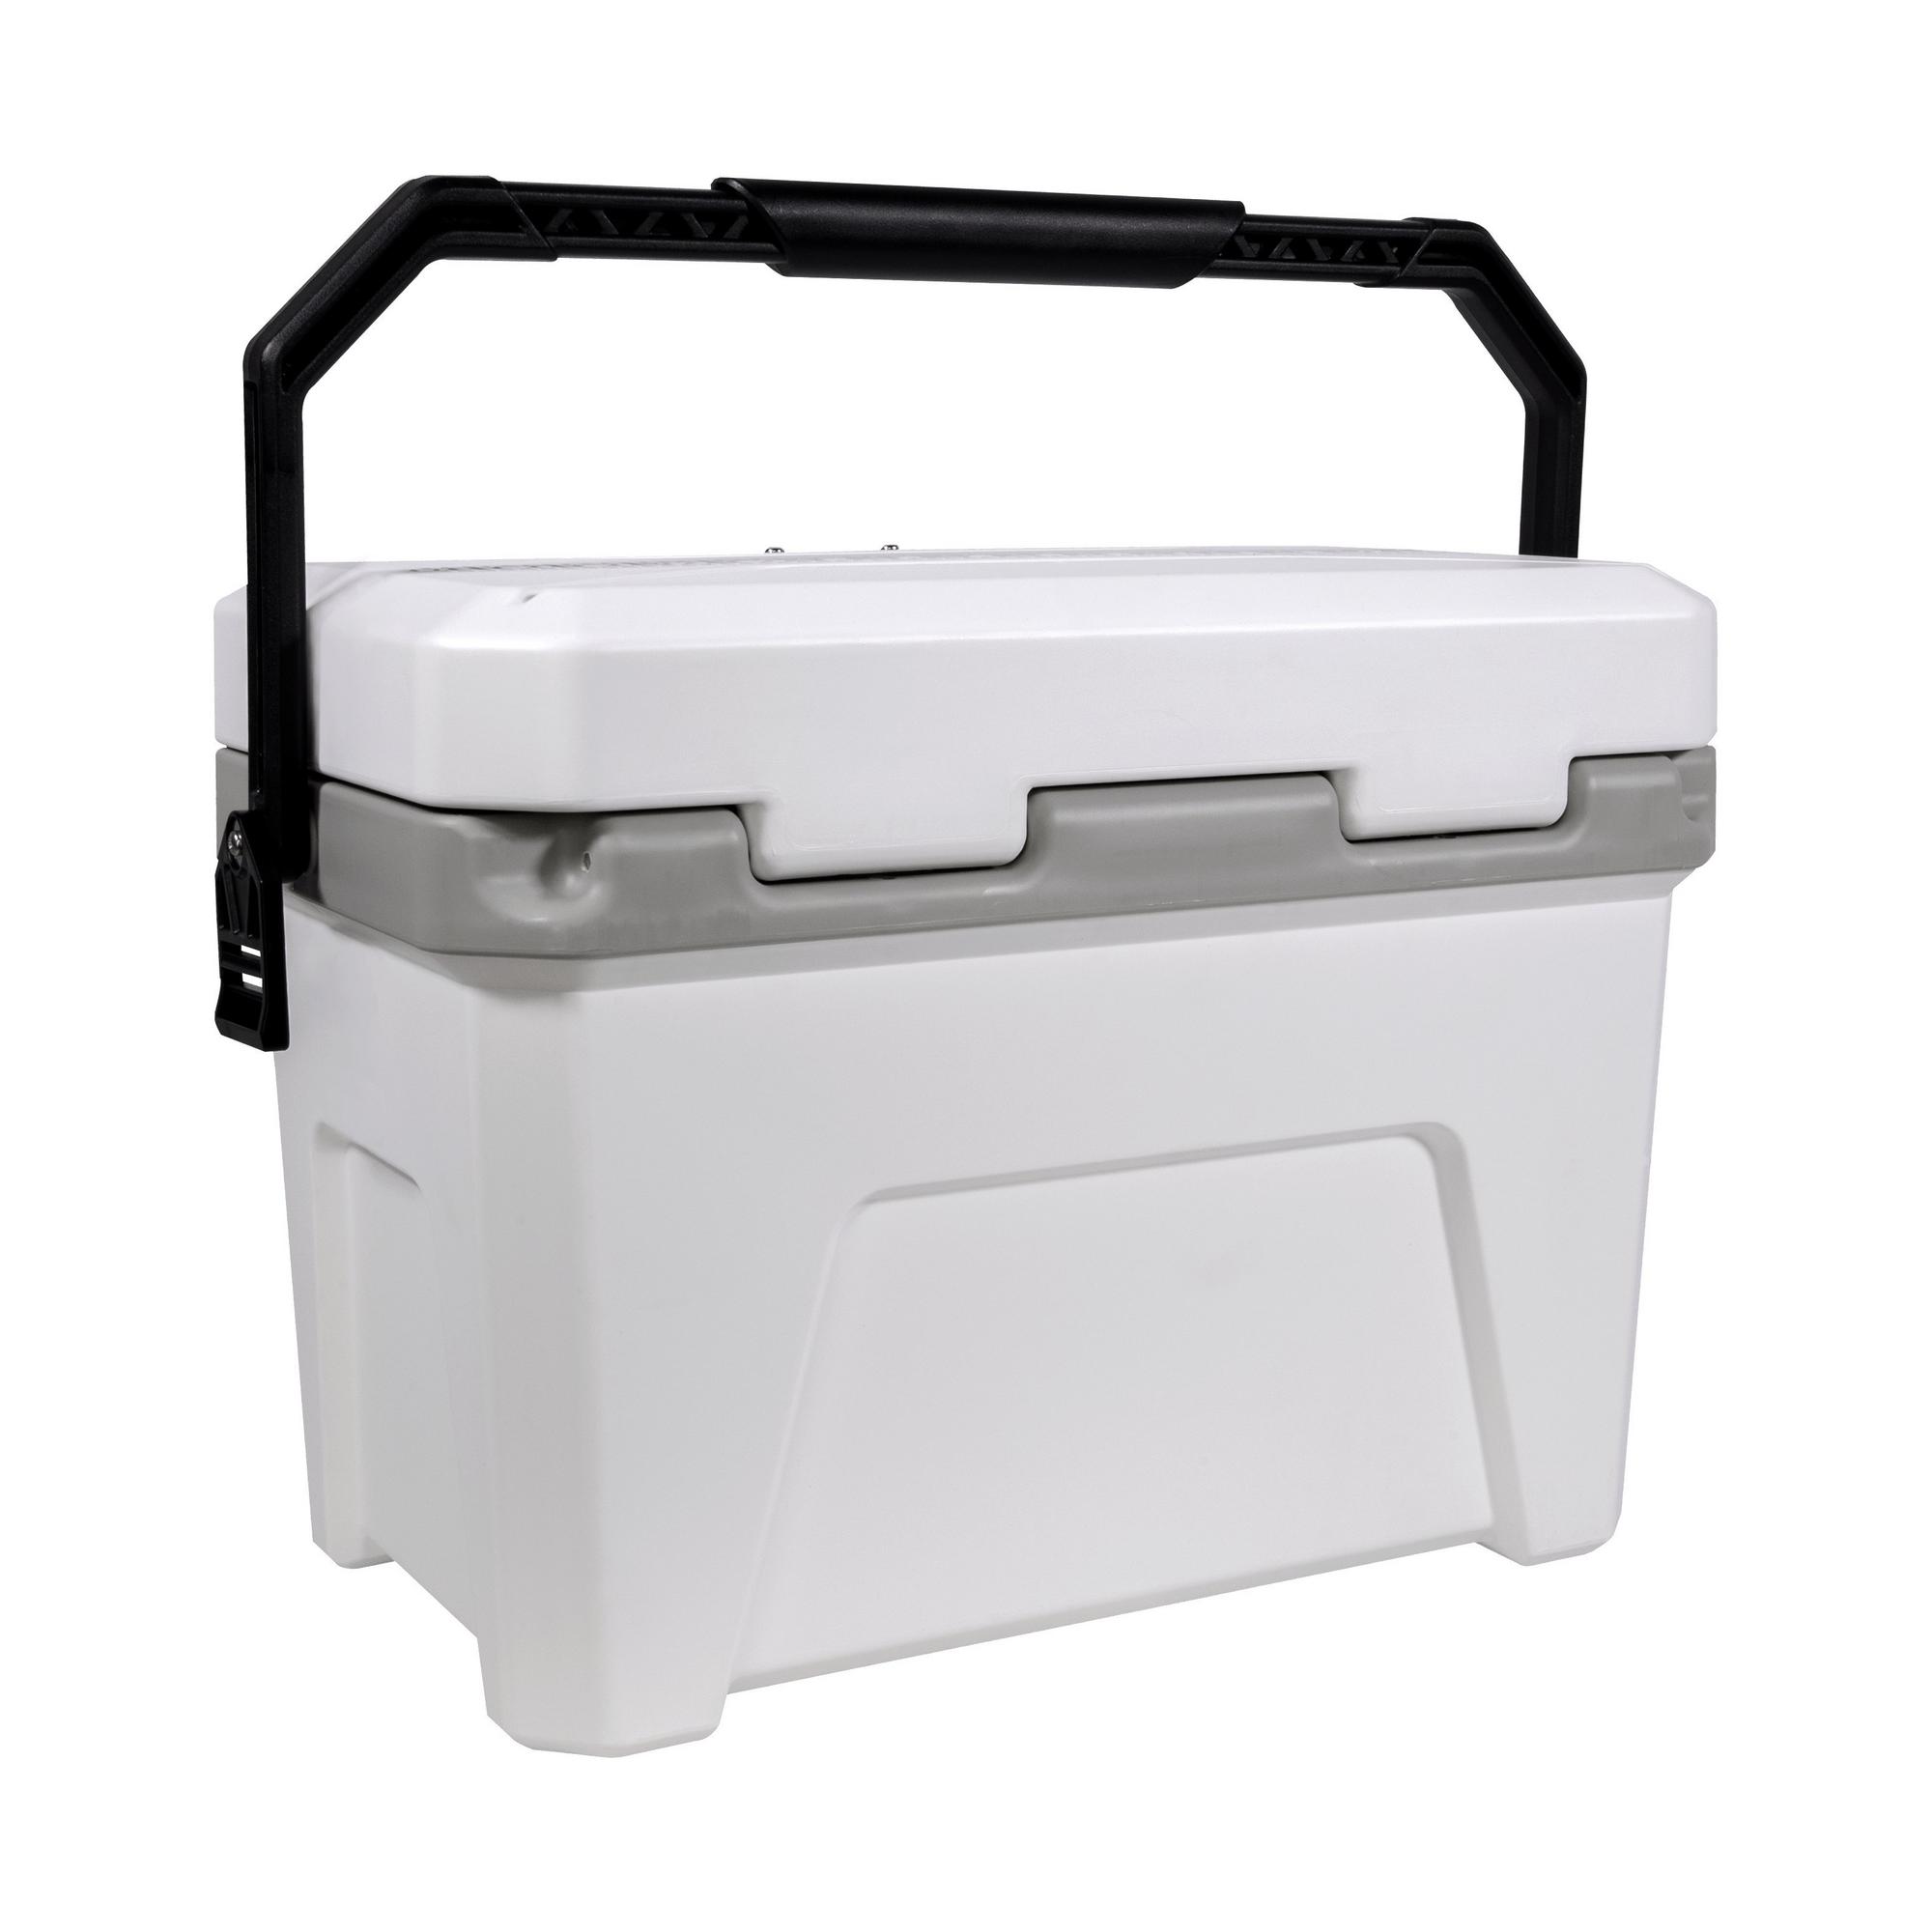 Plano Frost Hard Cooler 13L - Ice White